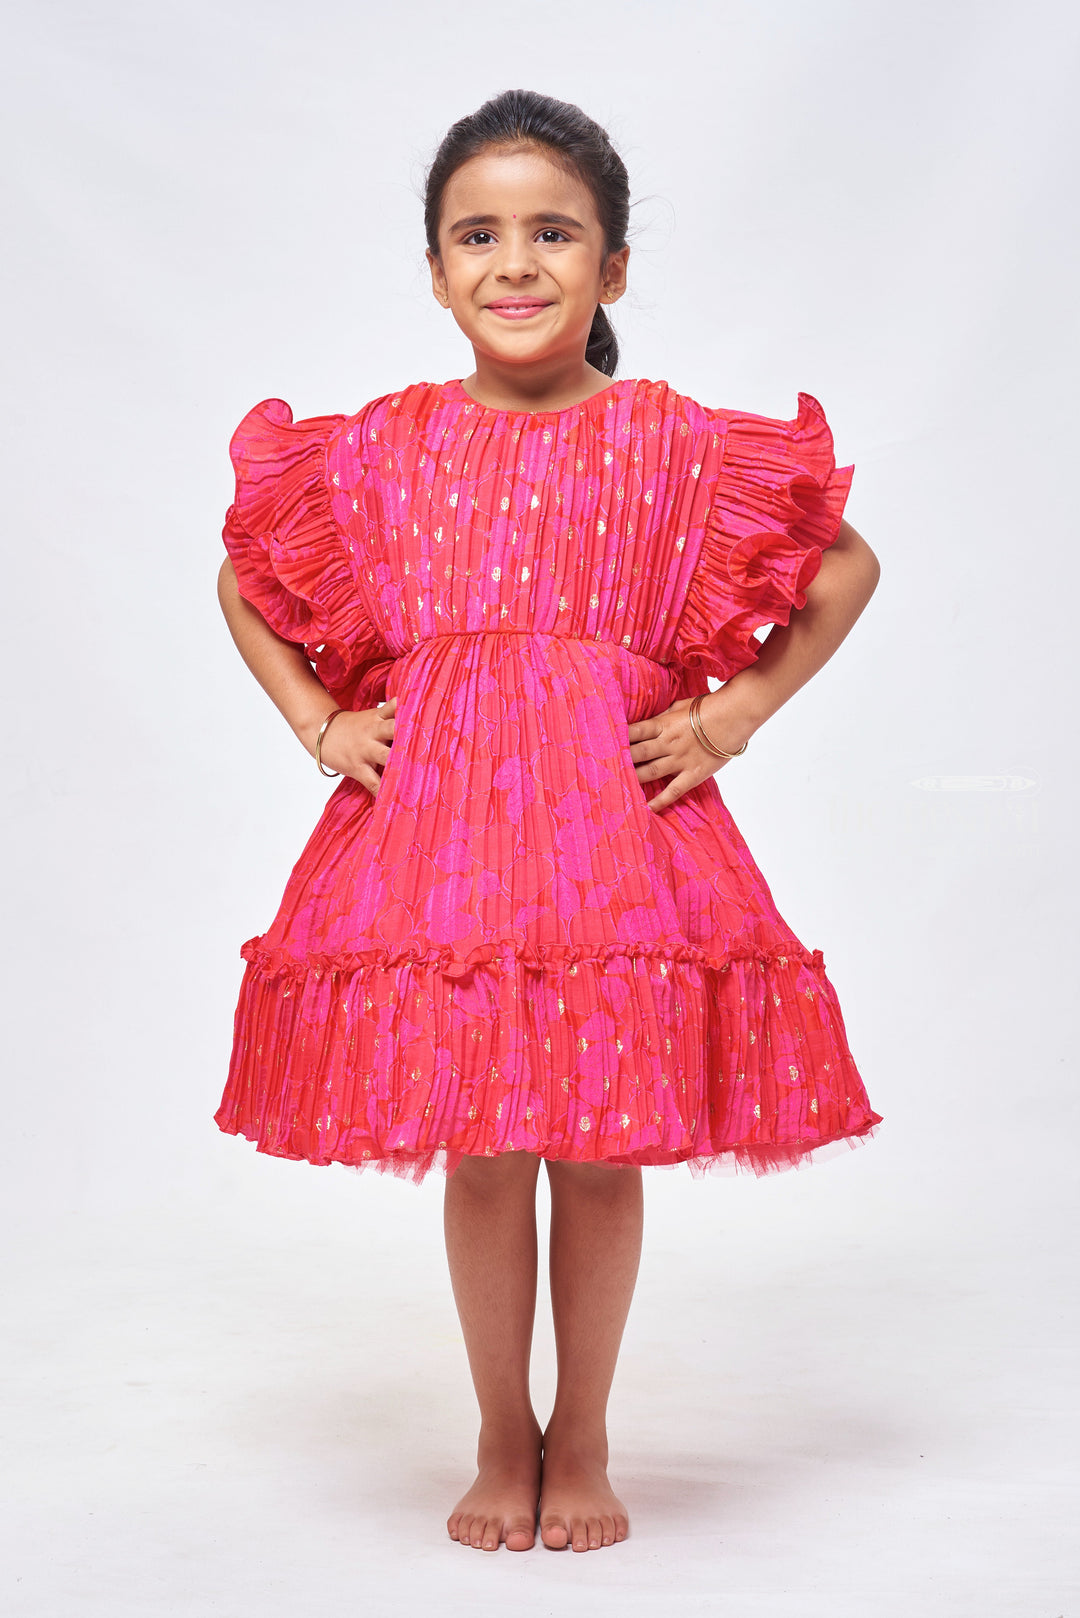 The Nesavu Girls Fancy Party Frock Red Radiance: Girls' Floral Foil-Printed Pleated Party Frock with Flare Nesavu 12 (3M) / Pink / Silk Blend PF137A-12 Adorable Baby Birthday Frock Designs | Little Girls' Fancy Party Dresses | The Nesavu